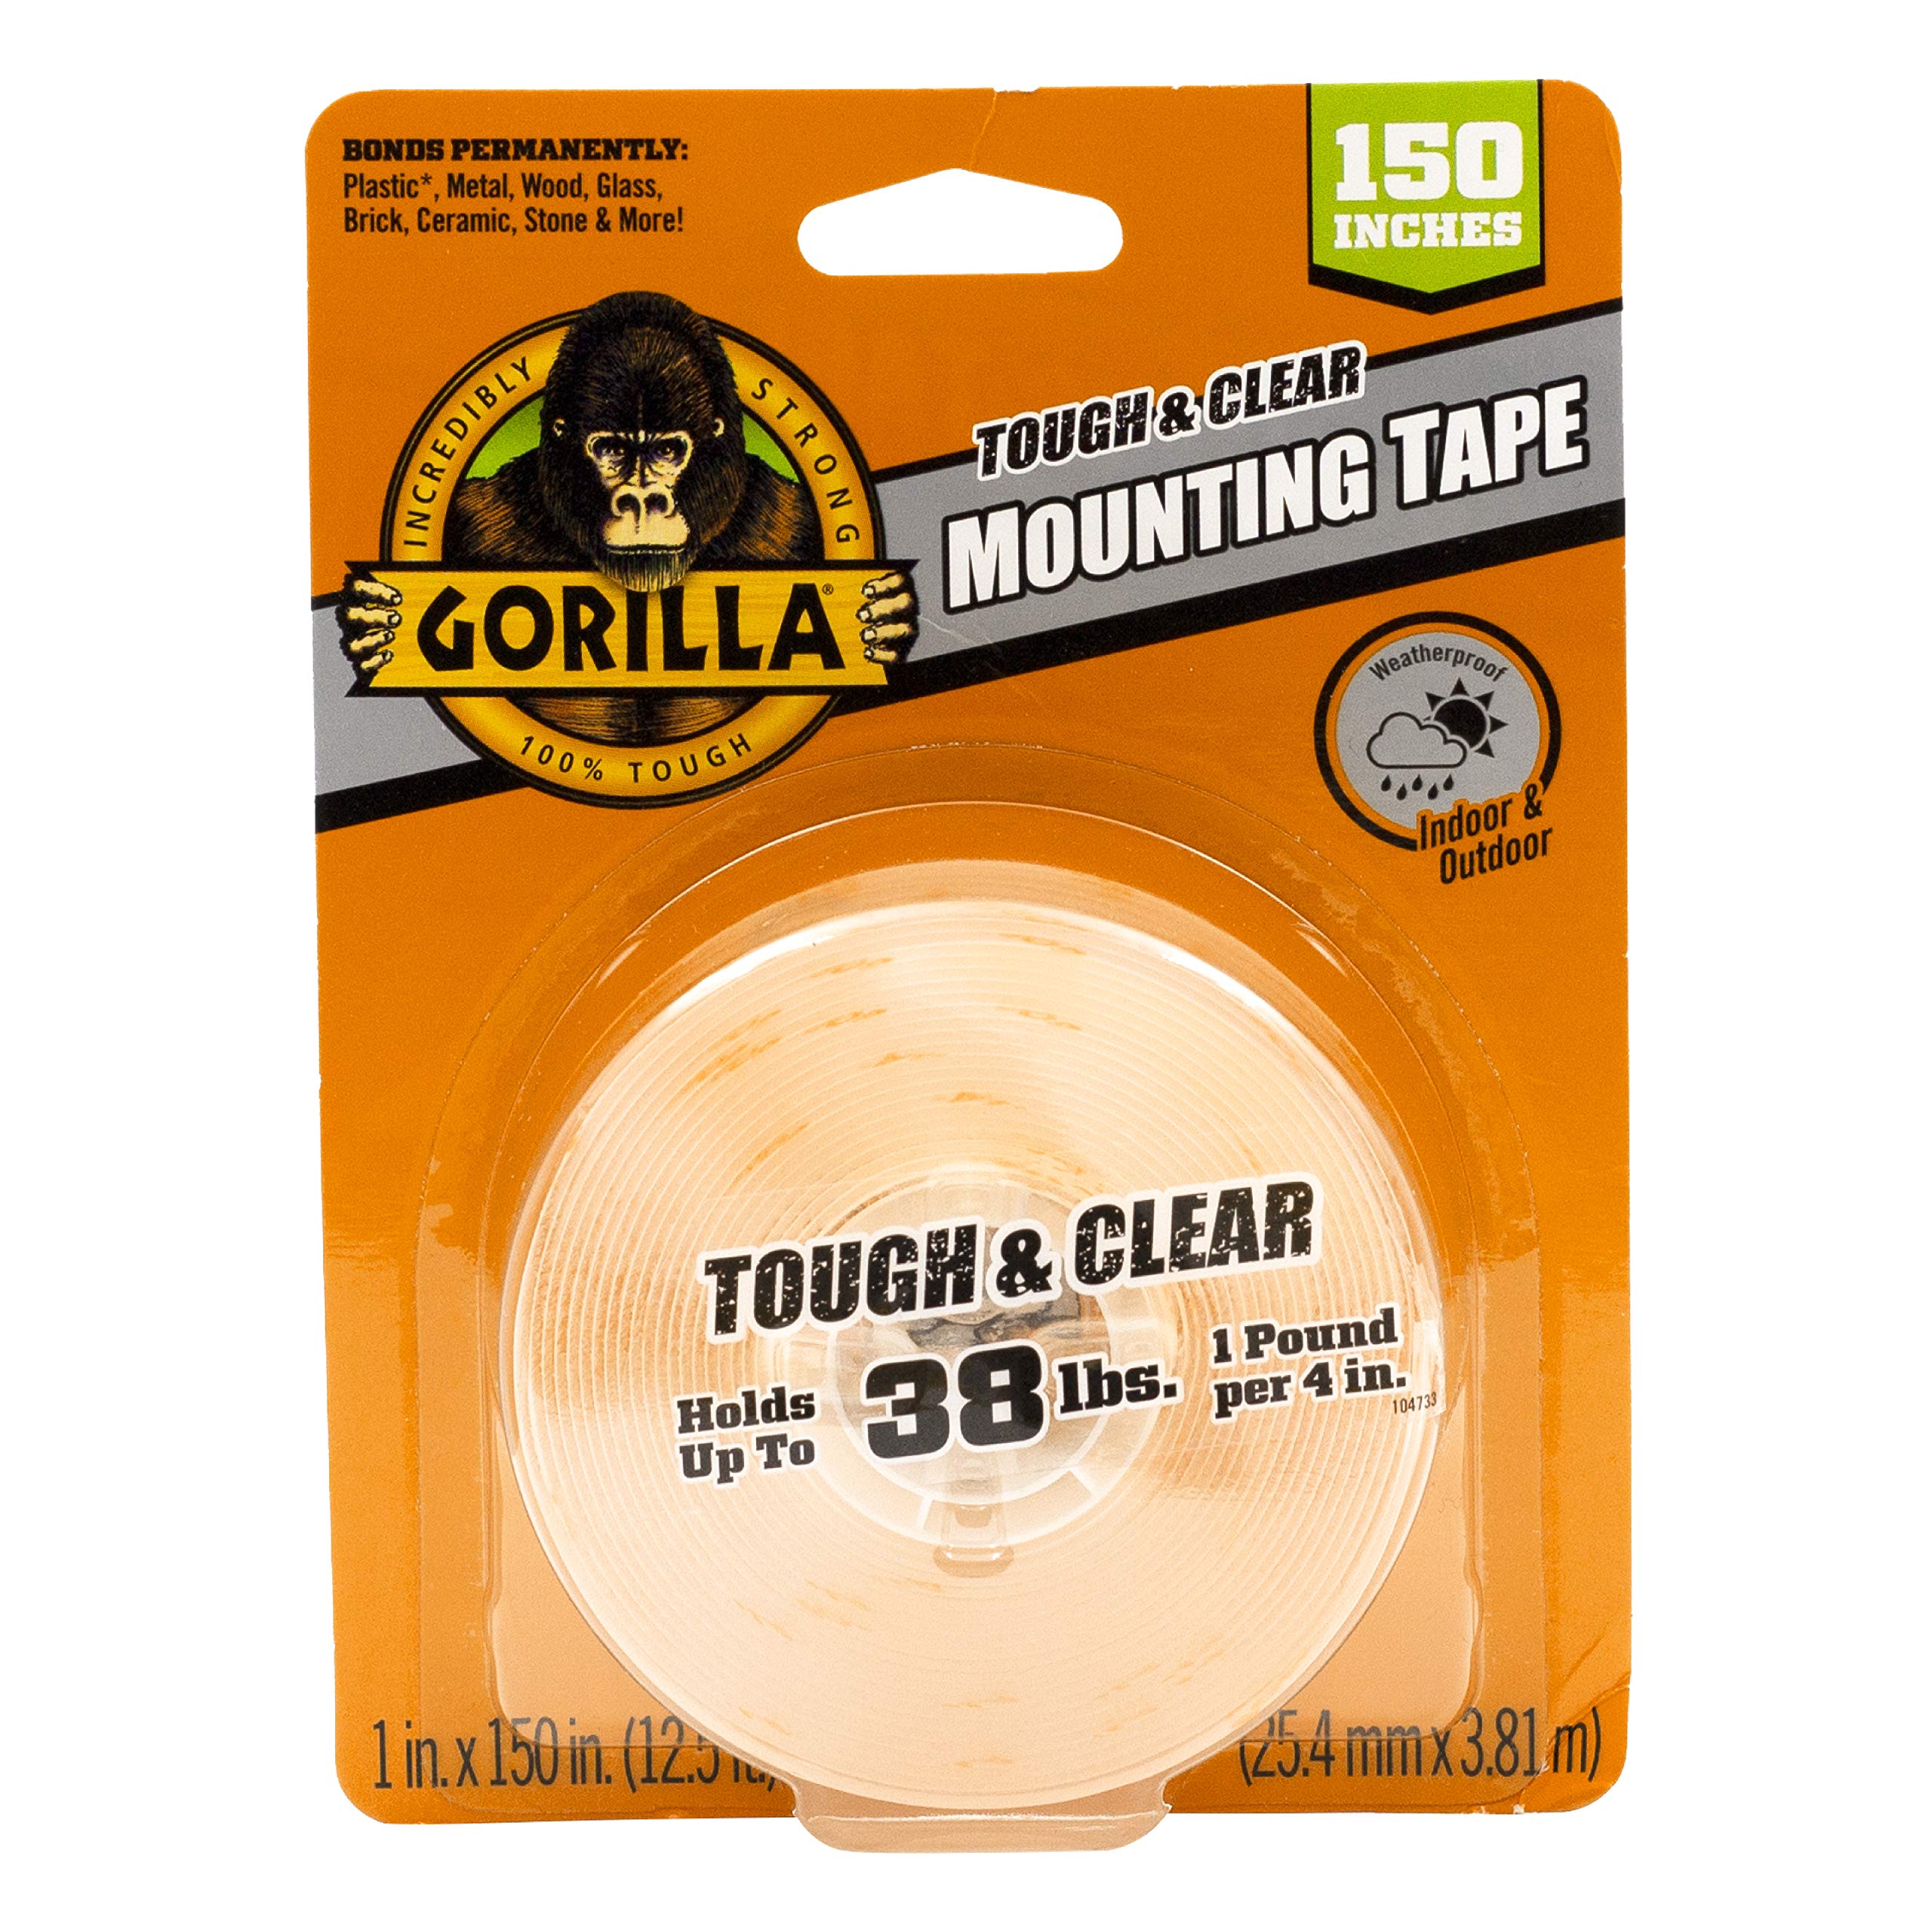 Gorilla Tough & Clear Double Sided XL Mounting Tape